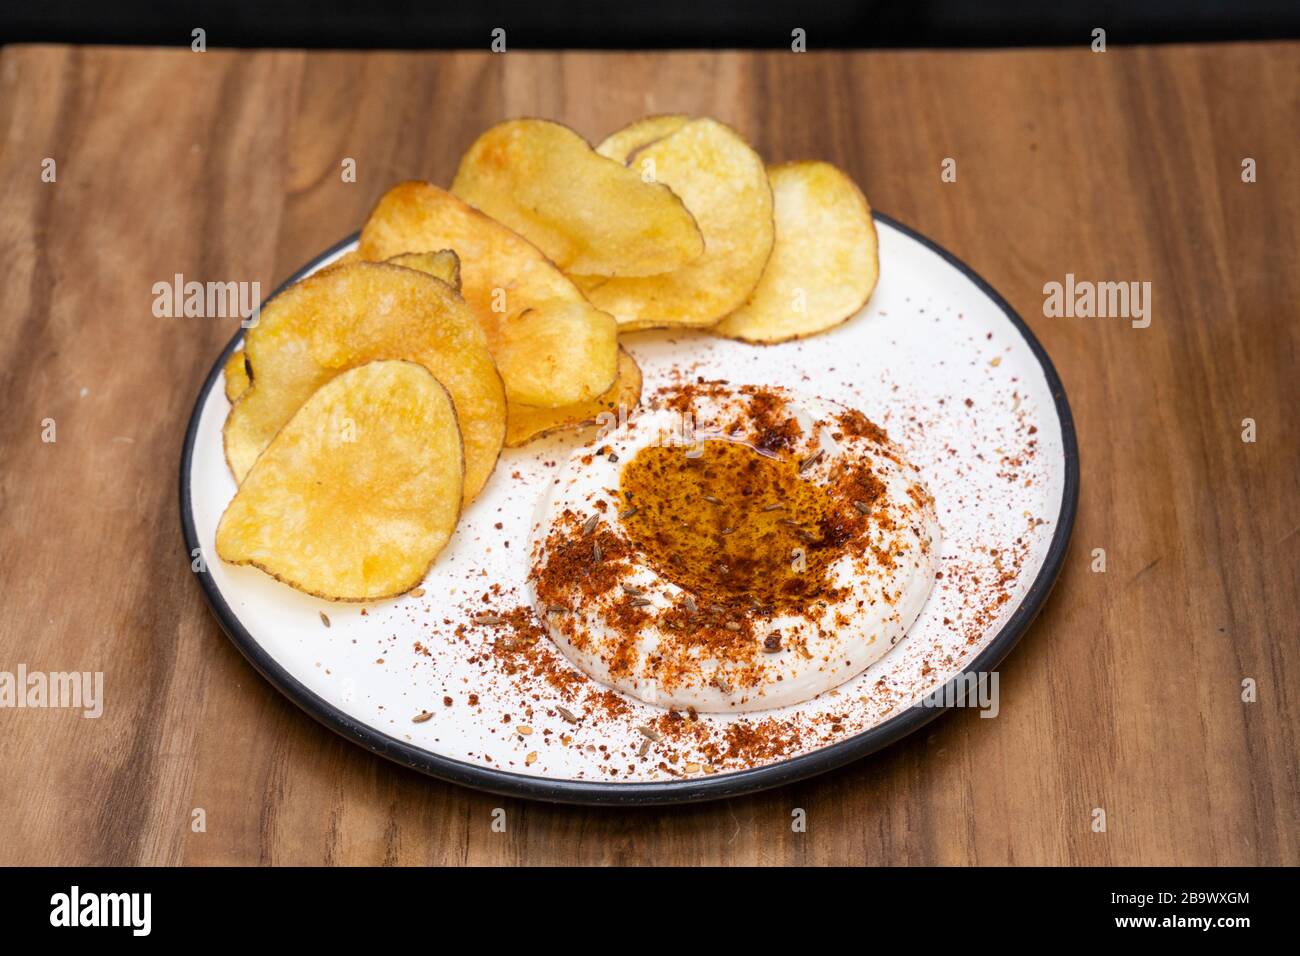 Taramasalata with baharat Middle Eastern spice mix and crisps Stock Photo